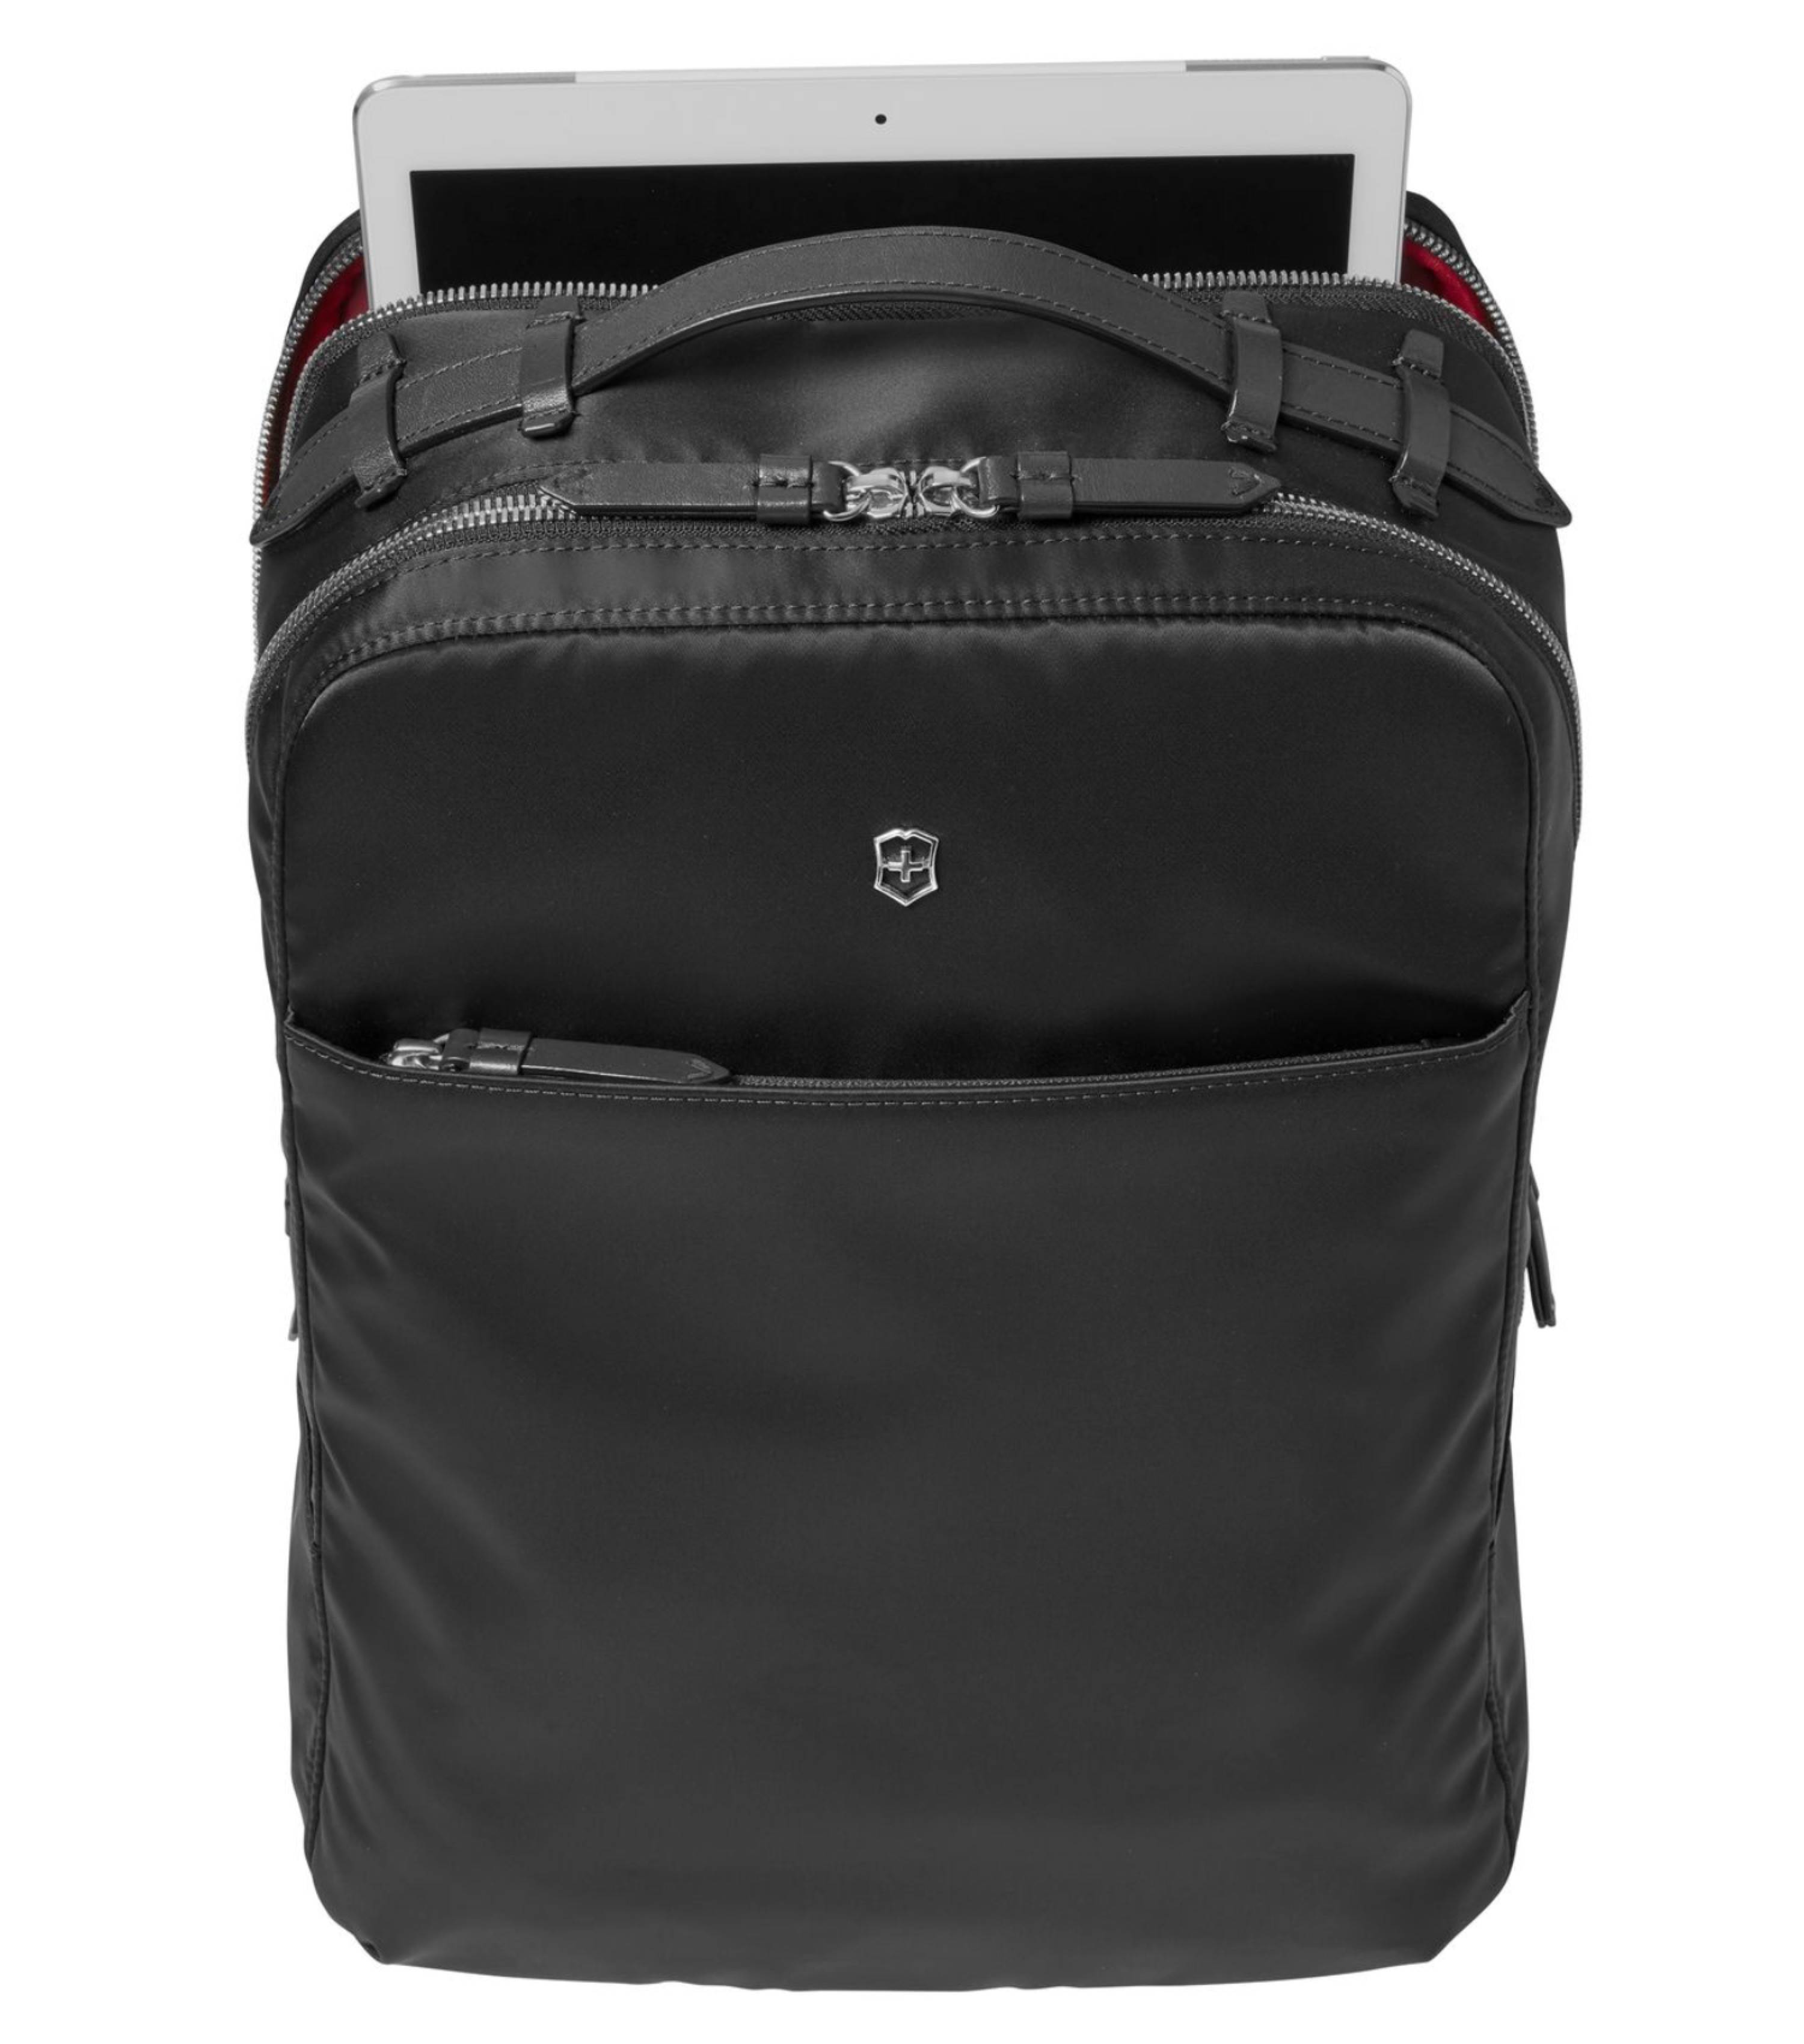 Victorinox Victoria 2.0 Deluxe Business Laptop Backpack by